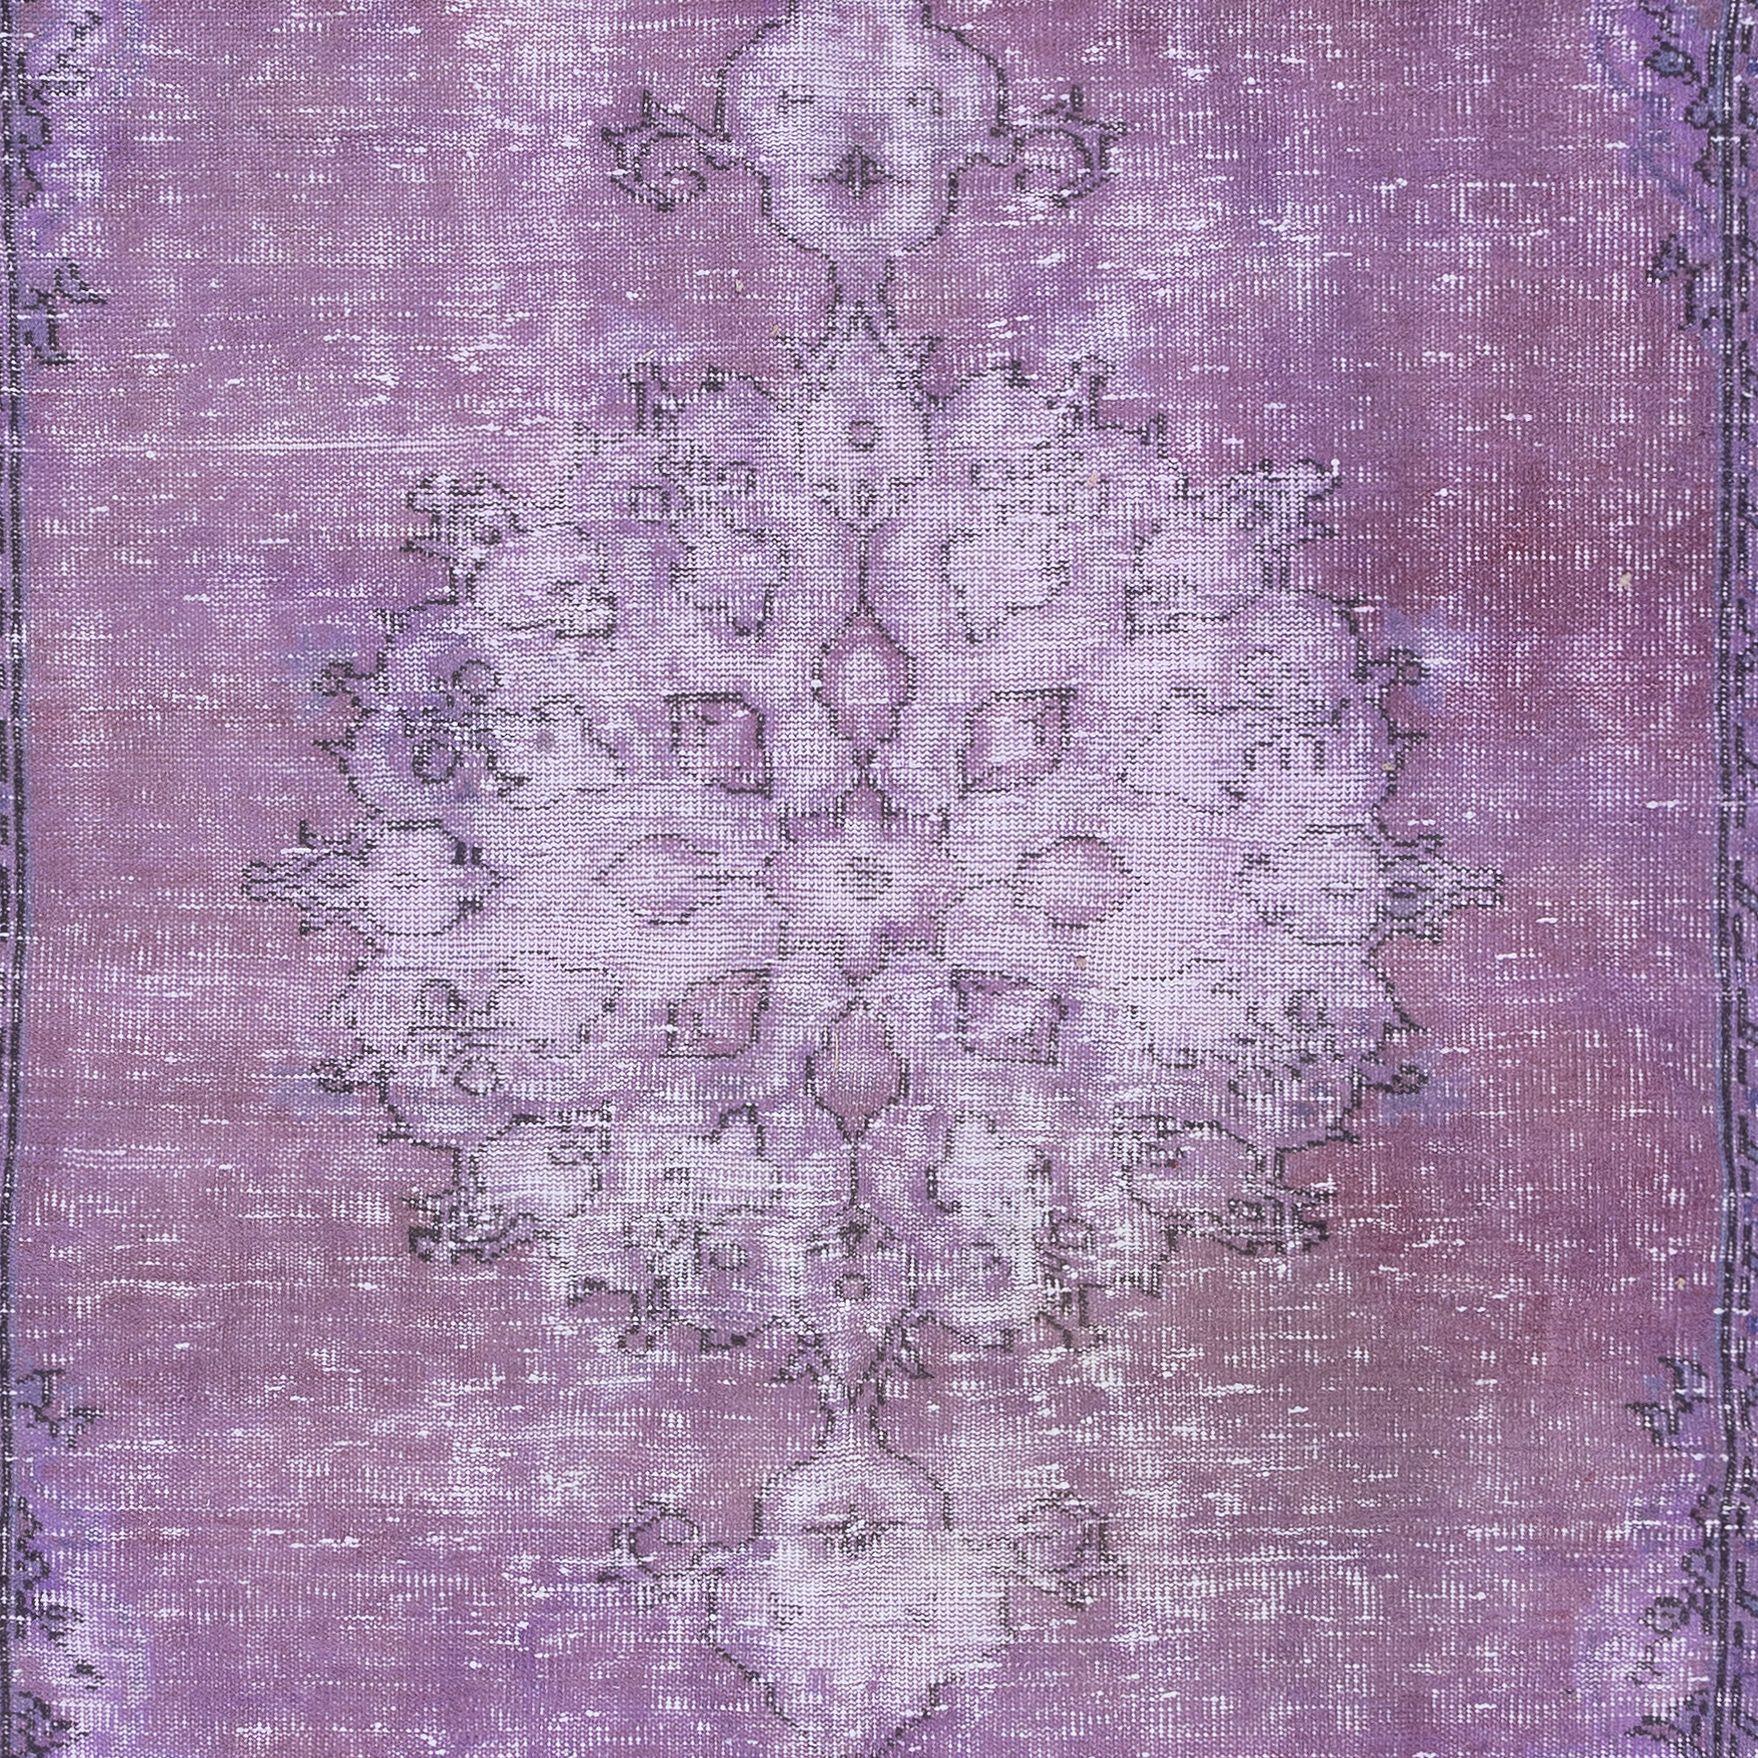 Hand-Knotted 5.8x9 Ft Hand Knotted Turkish Wool Area Rug, Lavender & Orchid Purple Colors For Sale